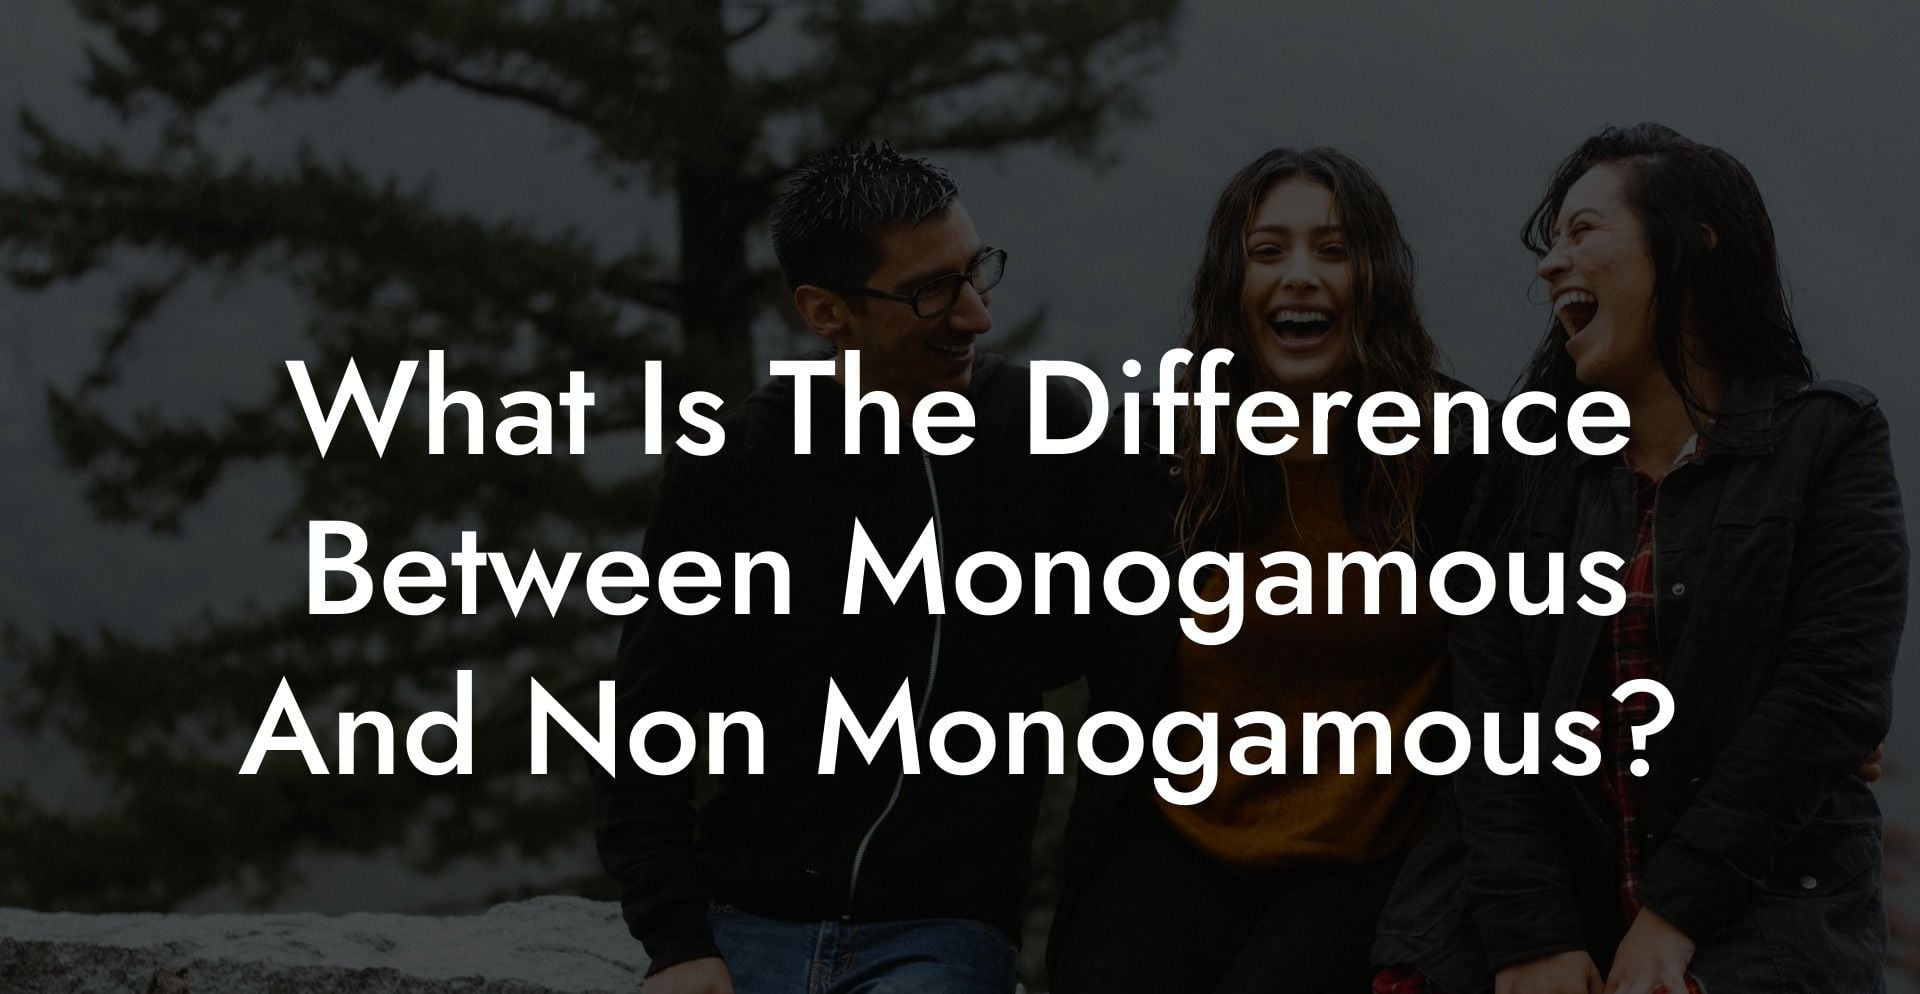 What Is The Difference Between Monogamous And Non Monogamous?